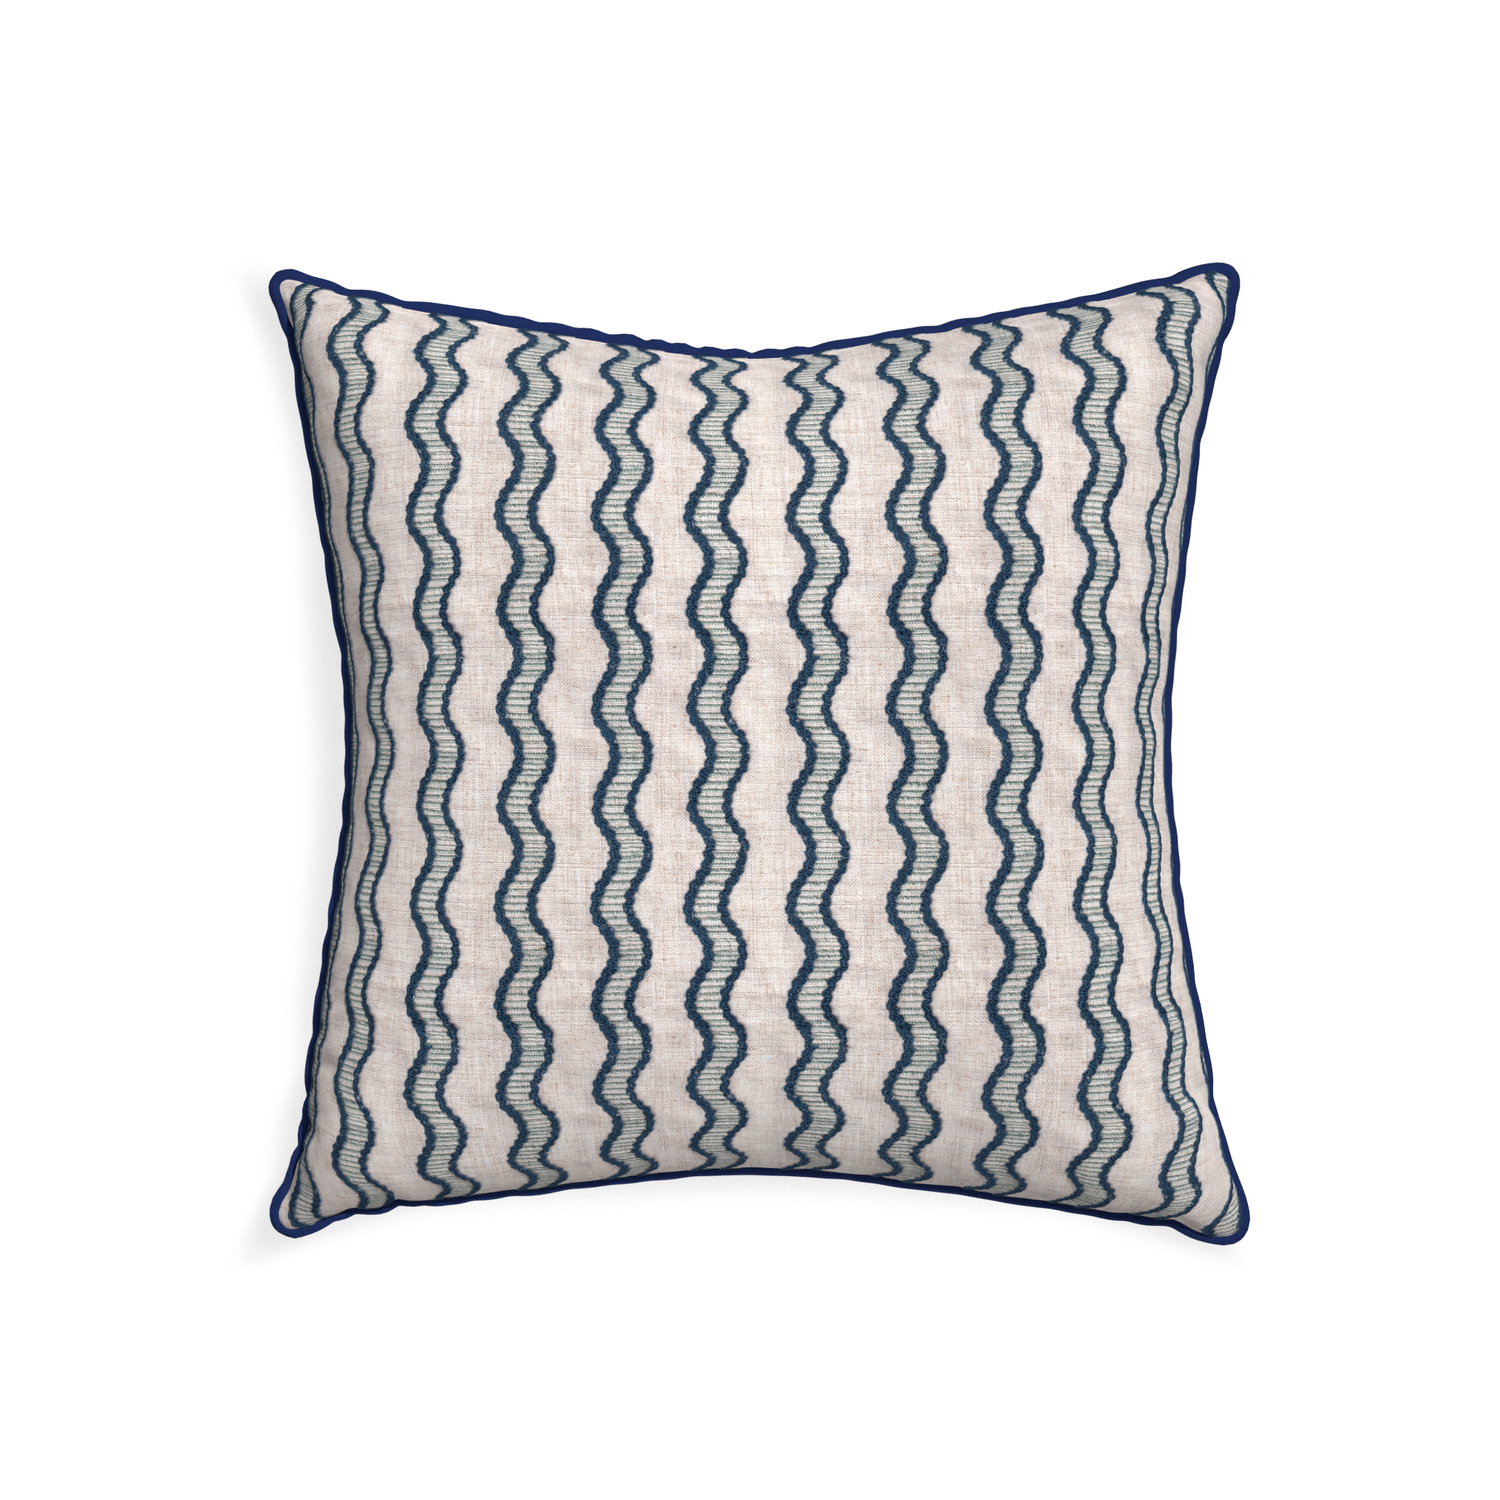 22-square beatrice custom embroidered wavepillow with midnight piping on white background